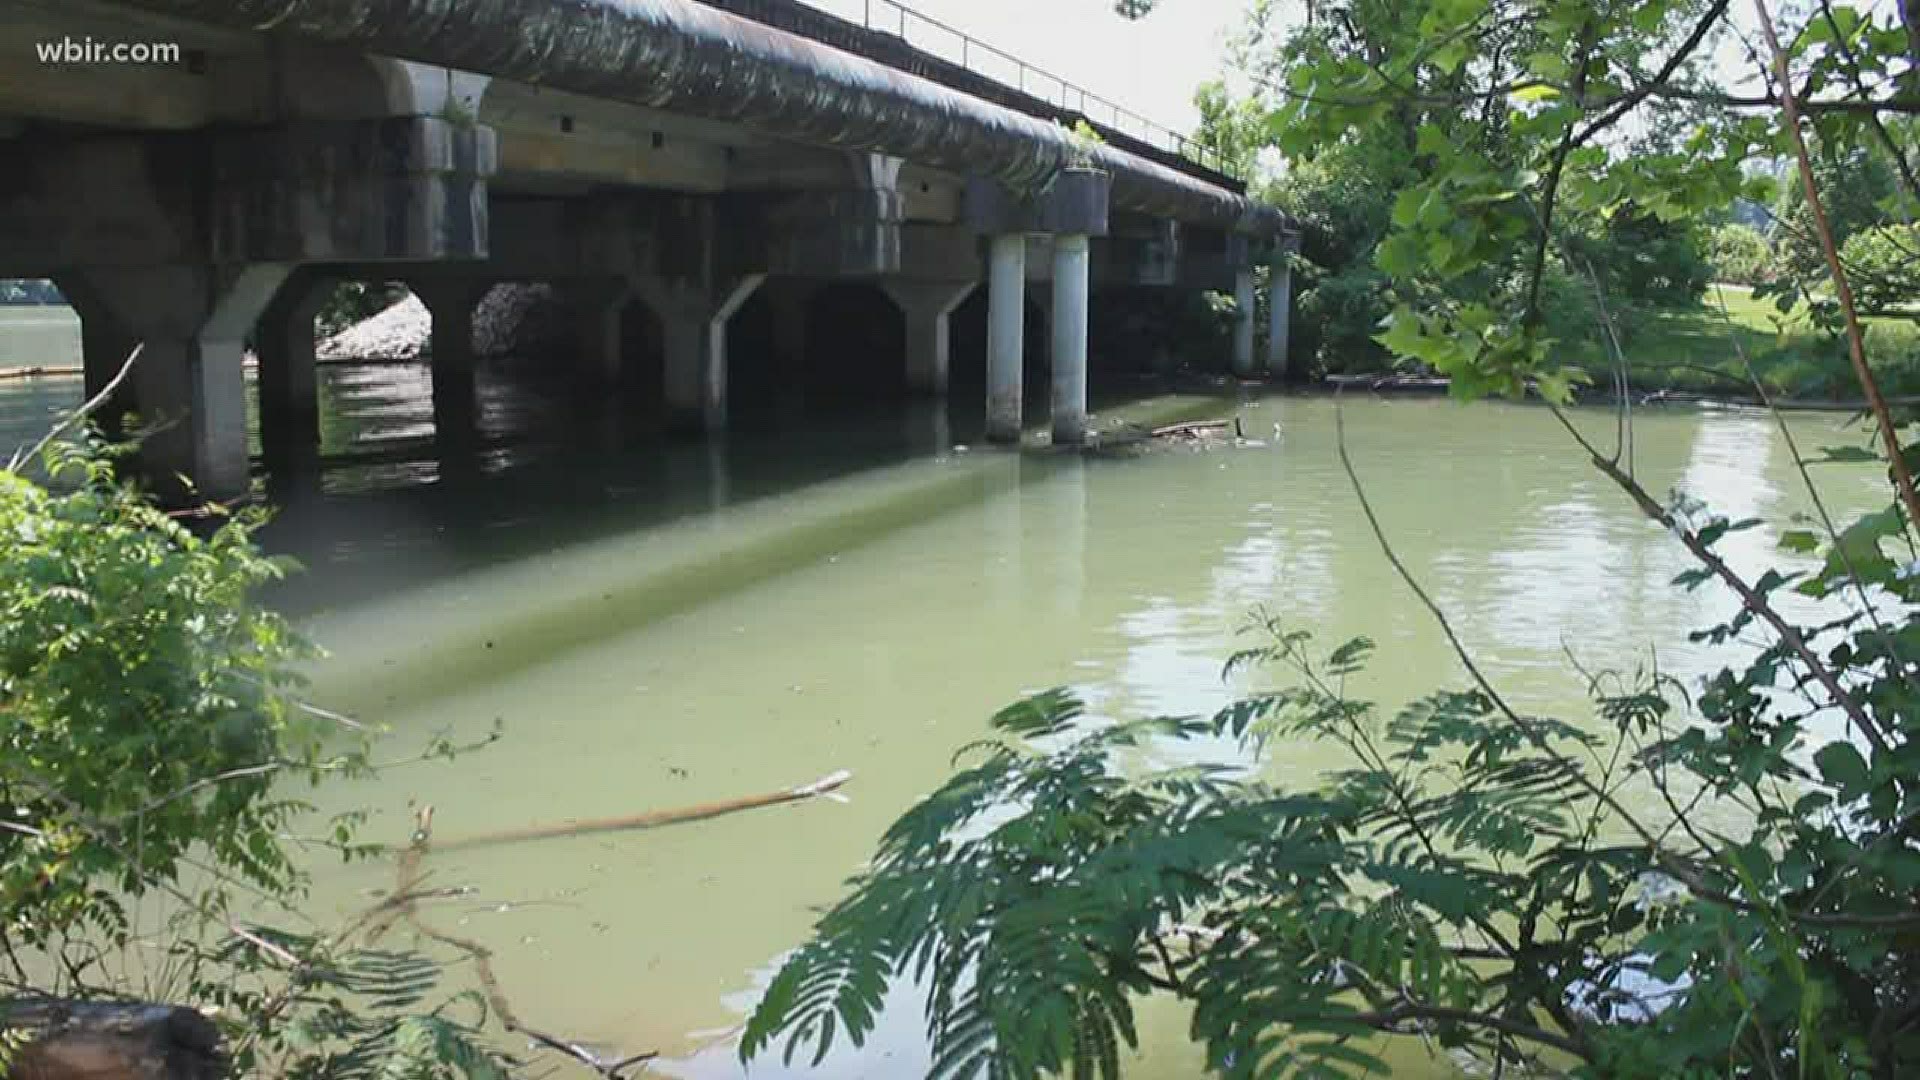 State documents show pollutants and bacteria such as E. coli and mercury in Beaver Creek, First, Second and Third Creek in Knoxville, Fort Loudon Lake and more.